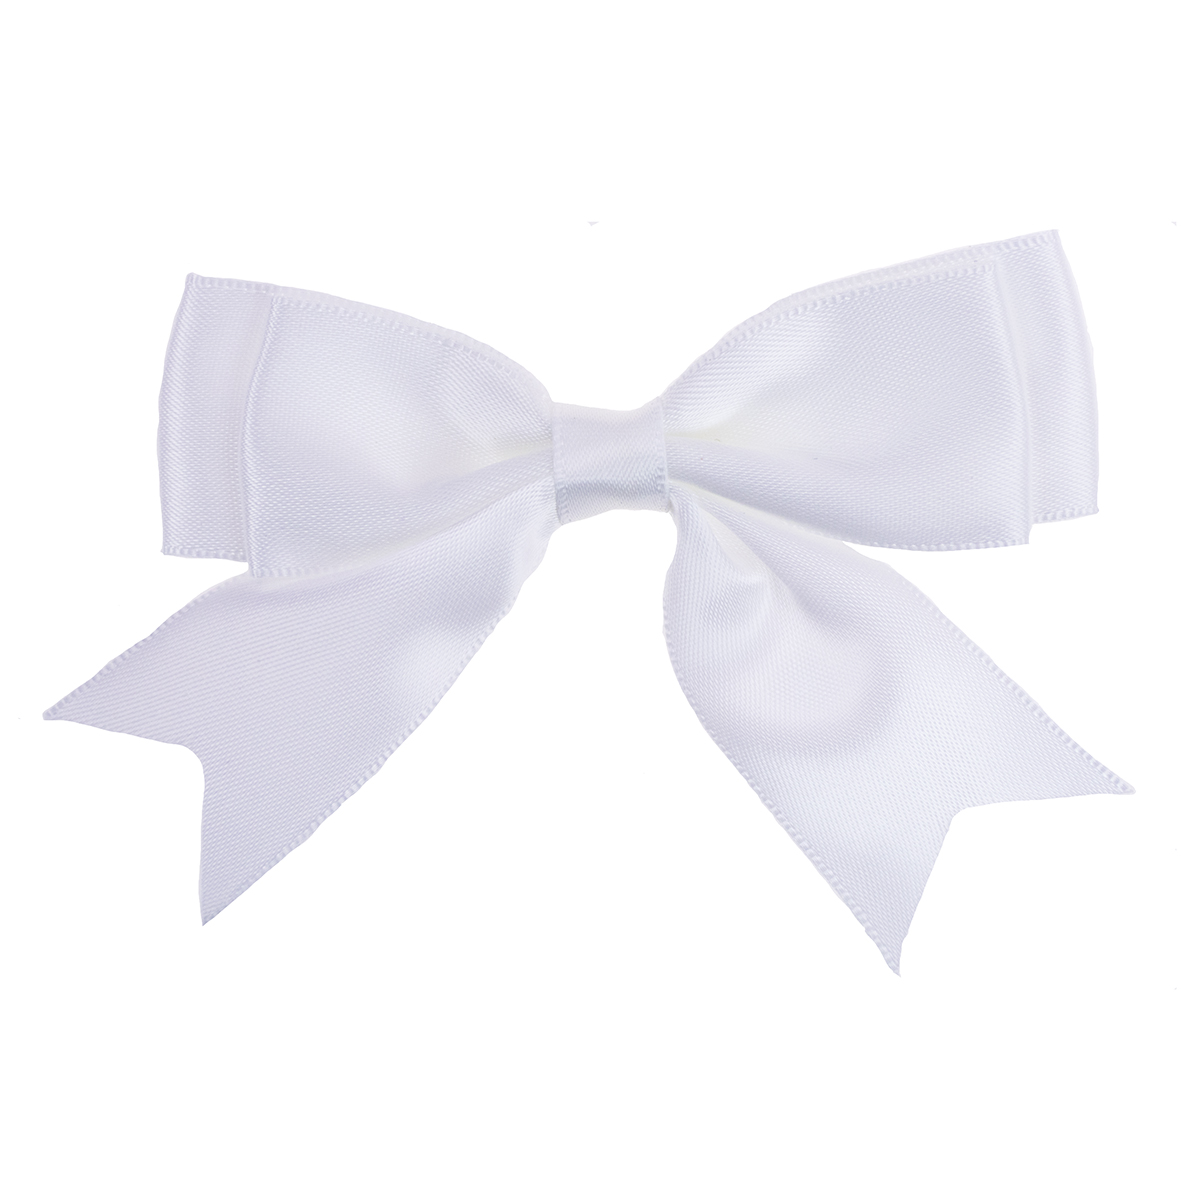 Double White Ribbon Bows 25mm wide